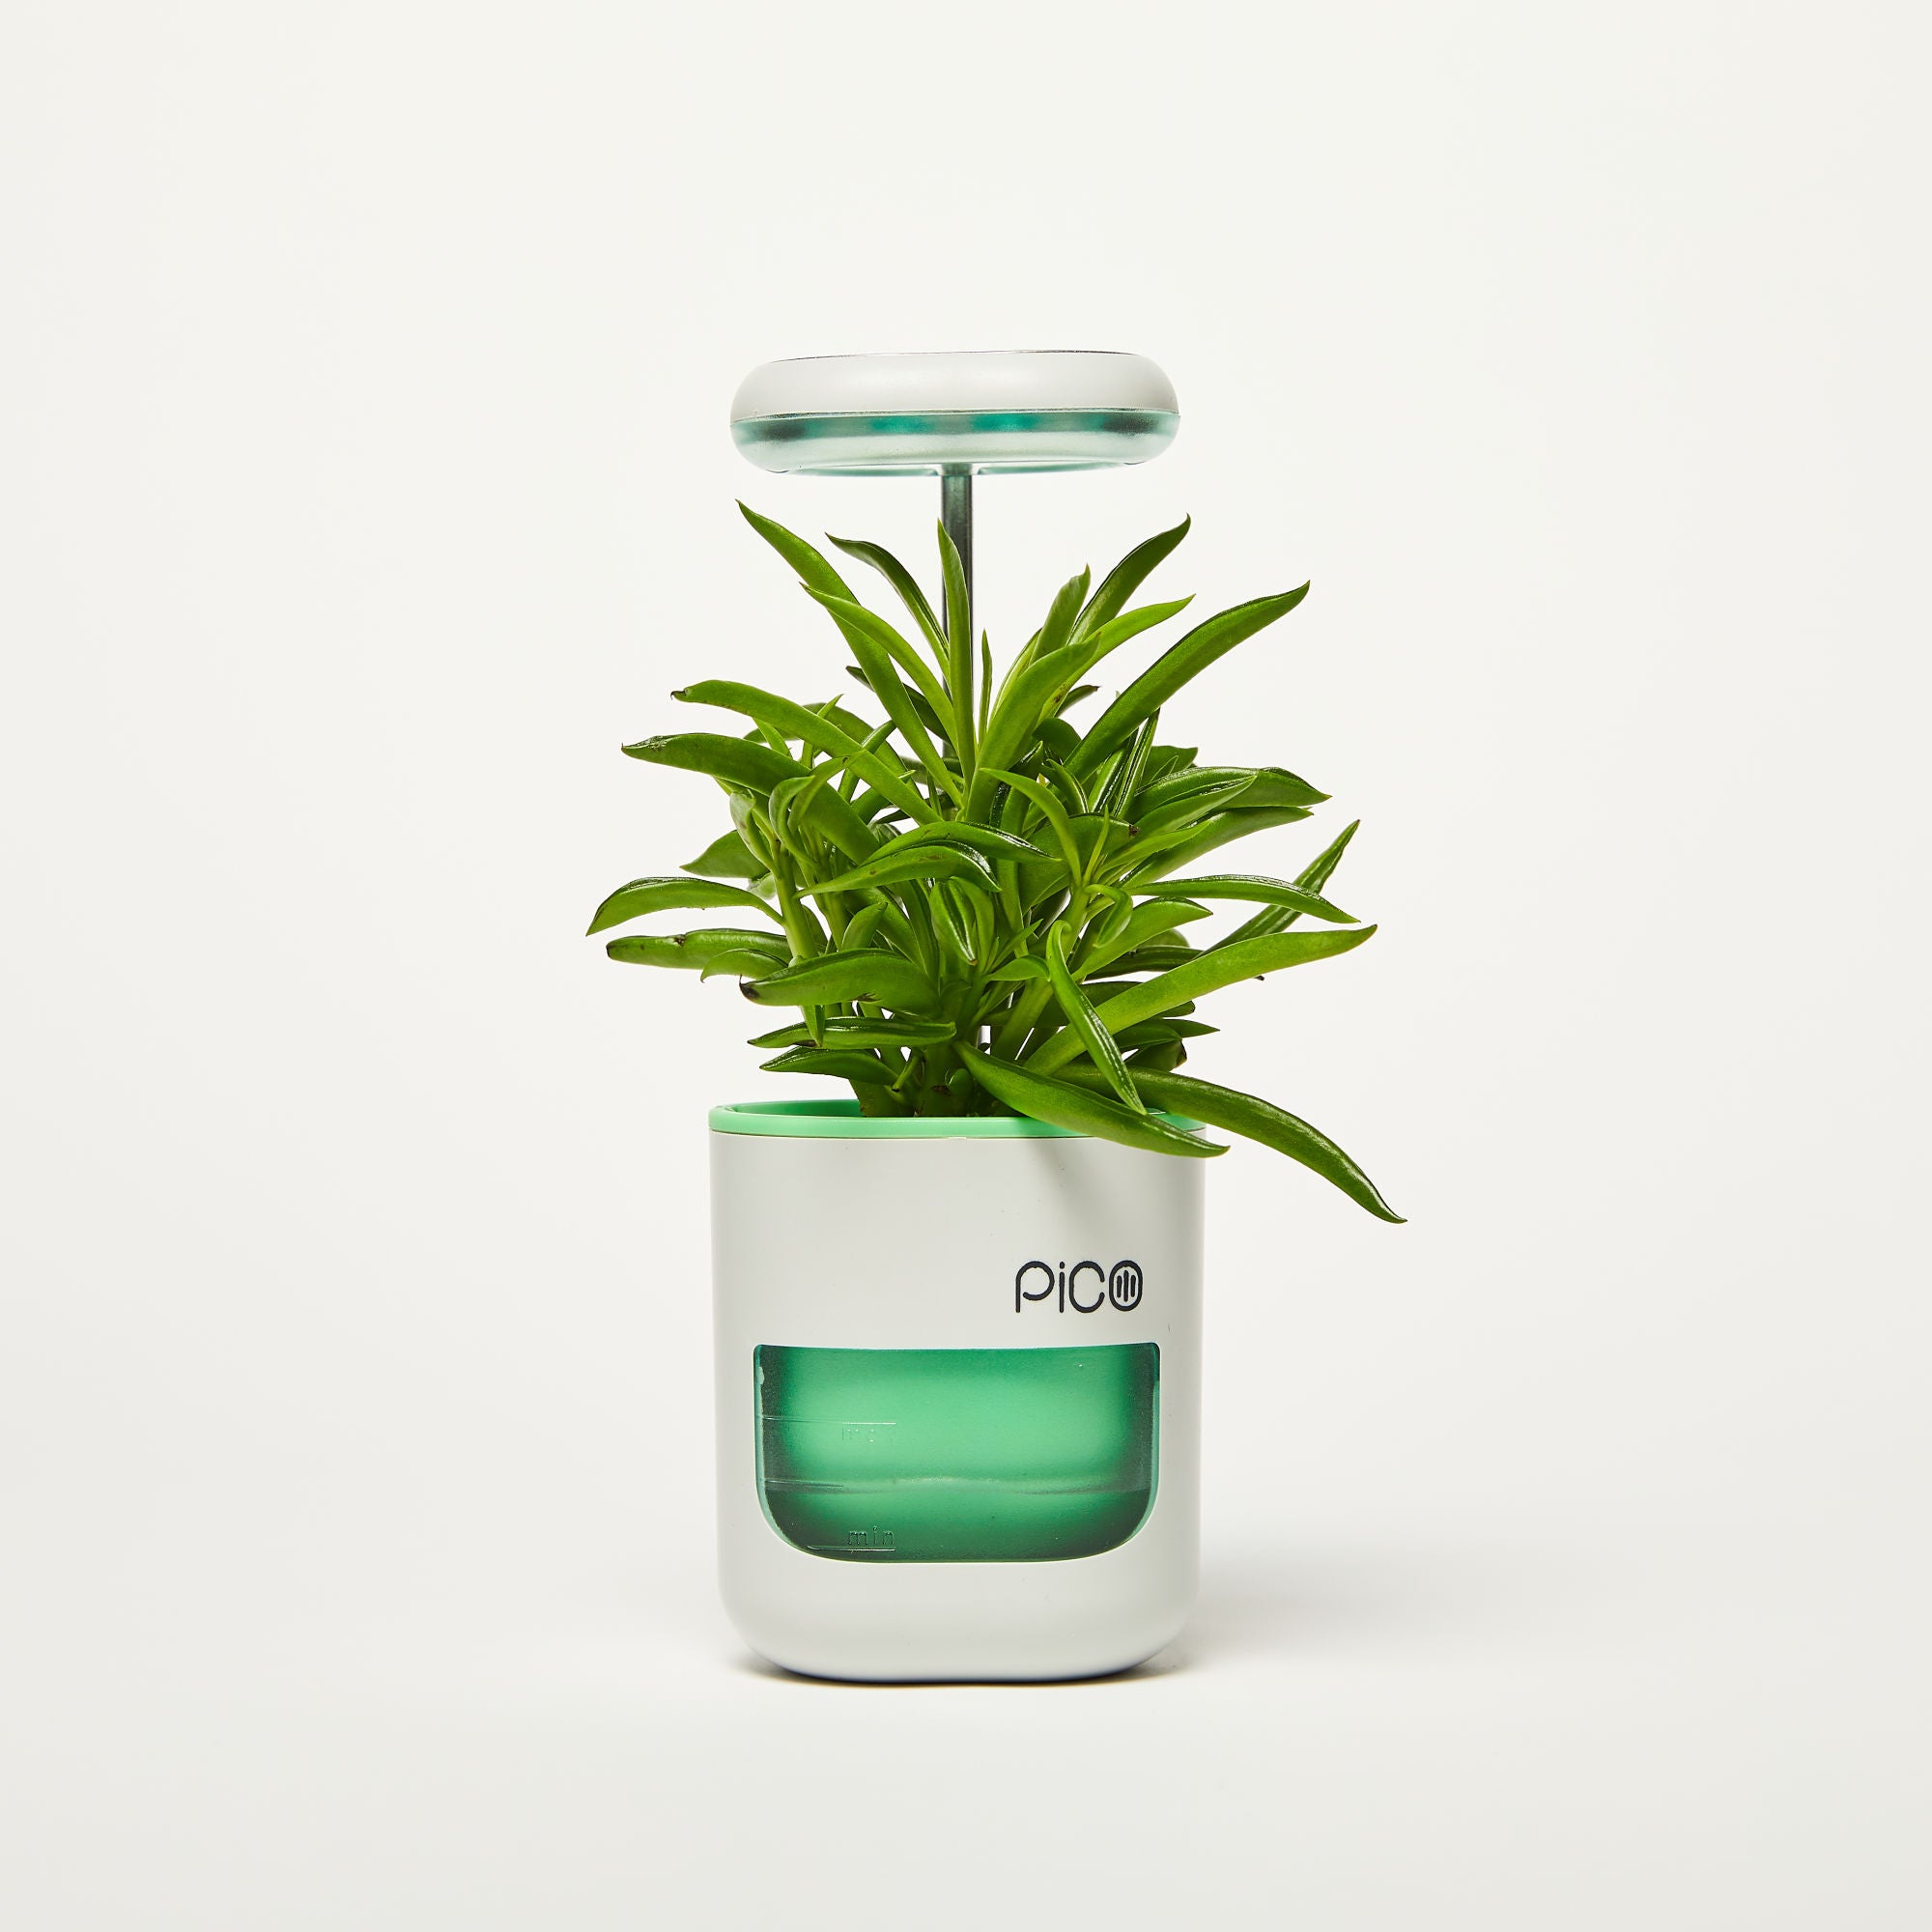 Pico Planter Indoor Garden with Plant Grow Light. This Herb Growing Kit is the Perfect Self Watering Planter. An Indoor Garden for Your Home and Office. Grow with Soil or Soil-Less Hydroponics.